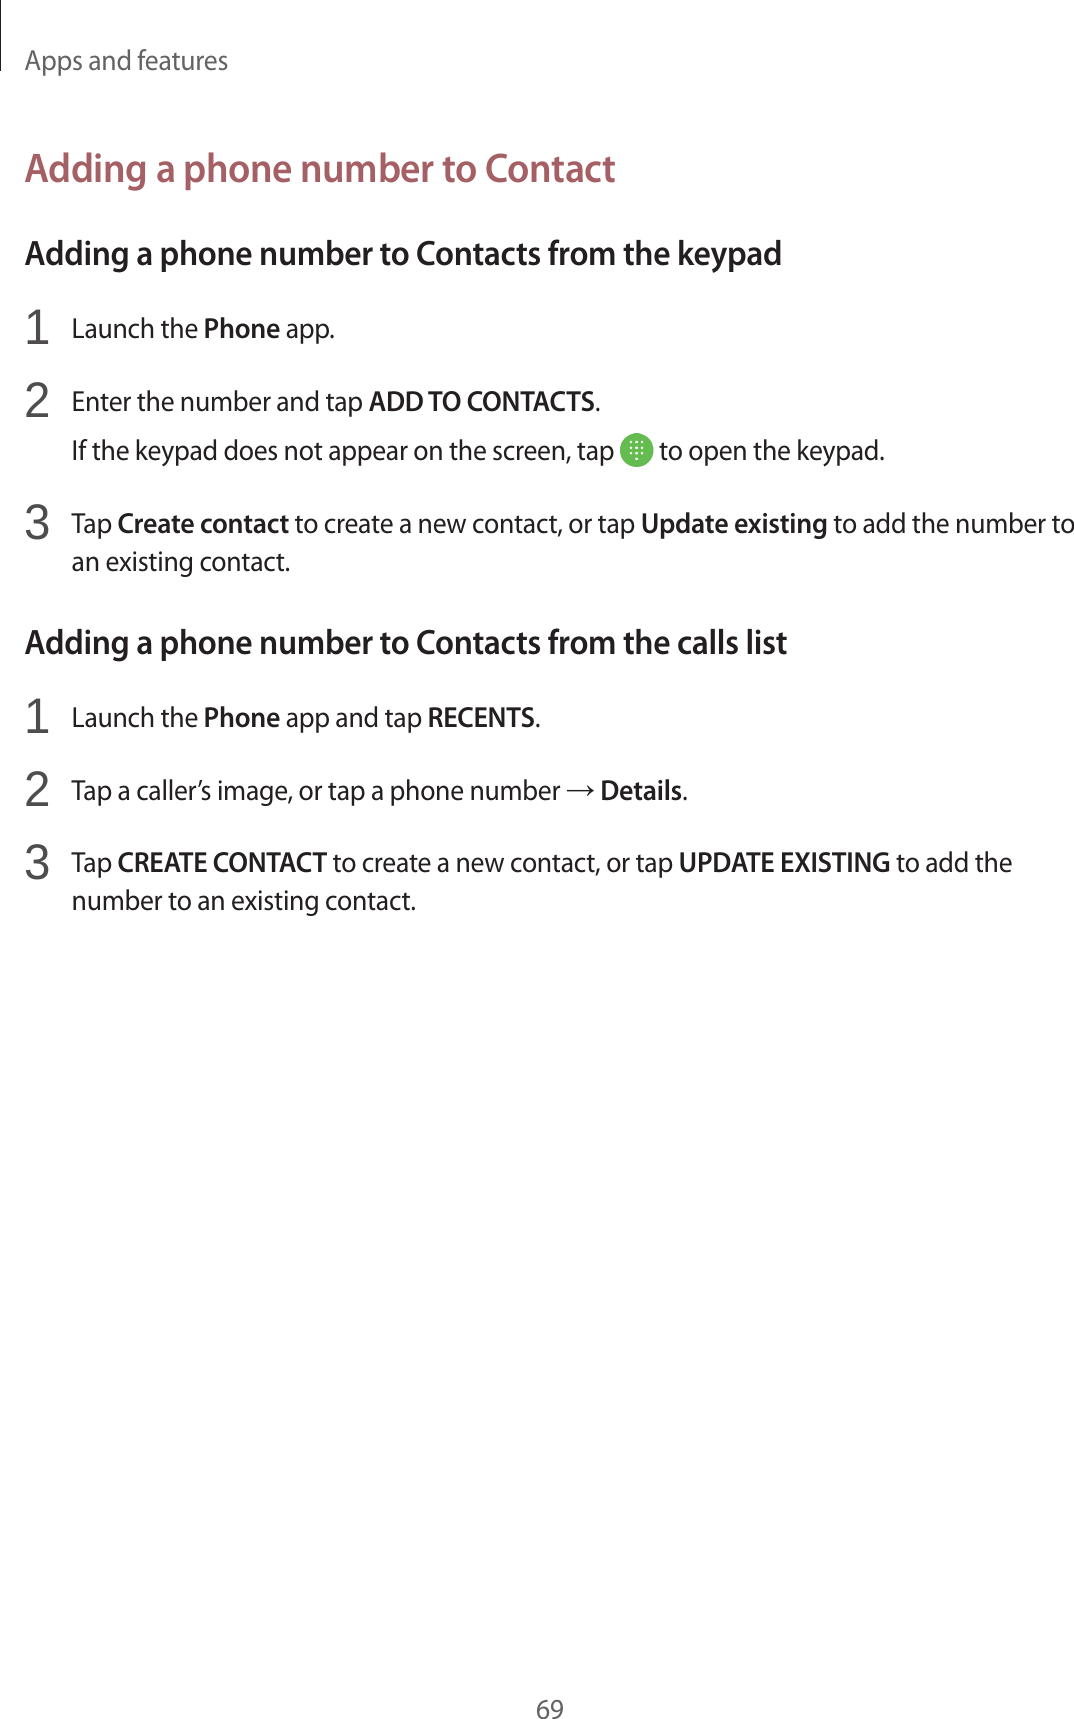 Apps and features69Adding a phone number to ContactAdding a phone number to Contacts from the keypad1  Launch the Phone app.2  Enter the number and tap ADD TO CONTACTS.If the keypad does not appear on the screen, tap   to open the keypad.3  Tap Create contact to create a new contact, or tap Update existing to add the number to an existing contact.Adding a phone number to Contacts from the calls list1  Launch the Phone app and tap RECENTS.2  Tap a caller’s image, or tap a phone number → Details.3  Tap CREATE CONTACT to create a new contact, or tap UPDATE EXISTING to add the number to an existing contact.